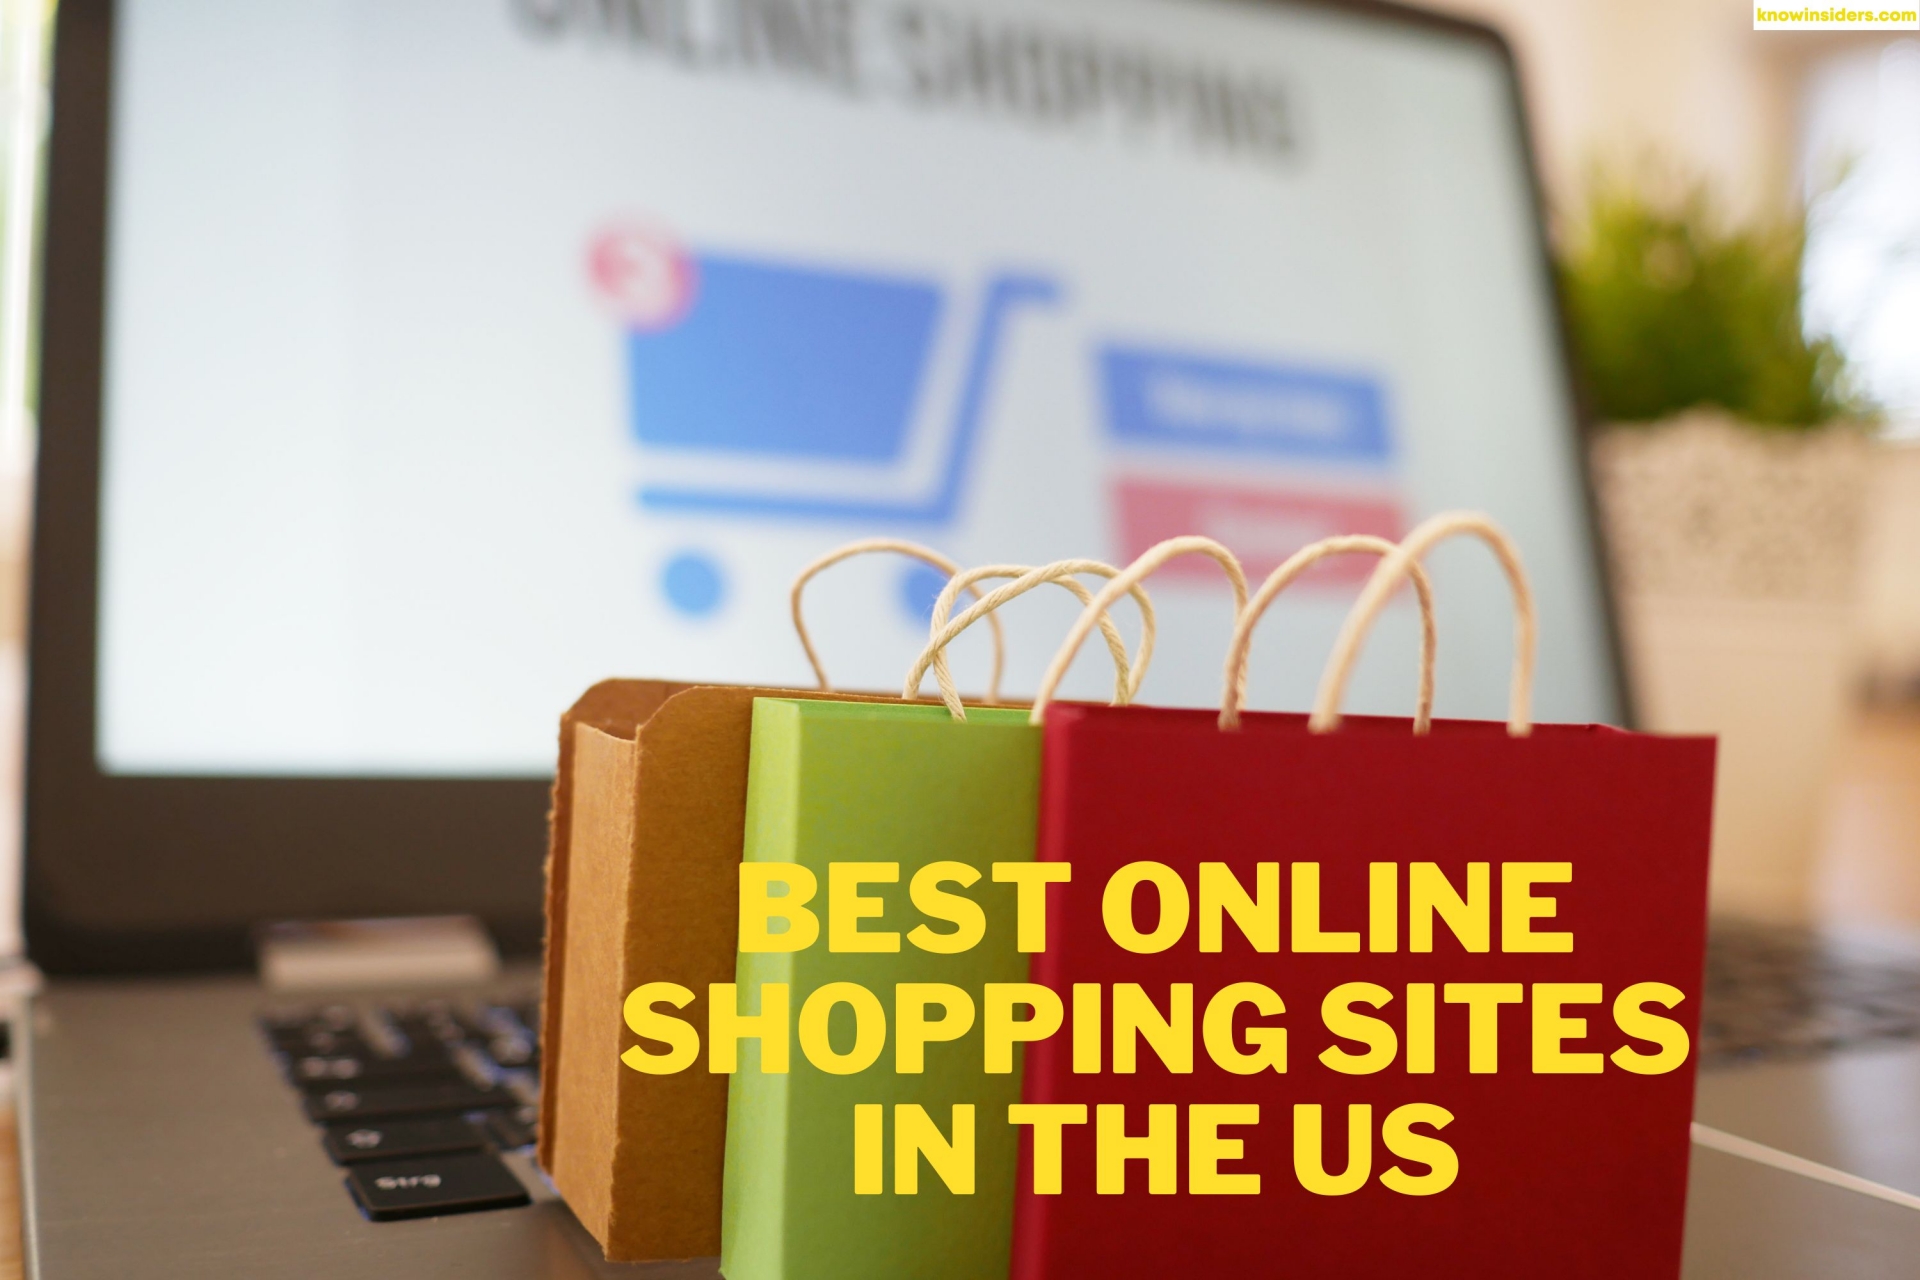 Top 20 Most Popular Shopping Sites For the Cheapest Clothes In The U.S